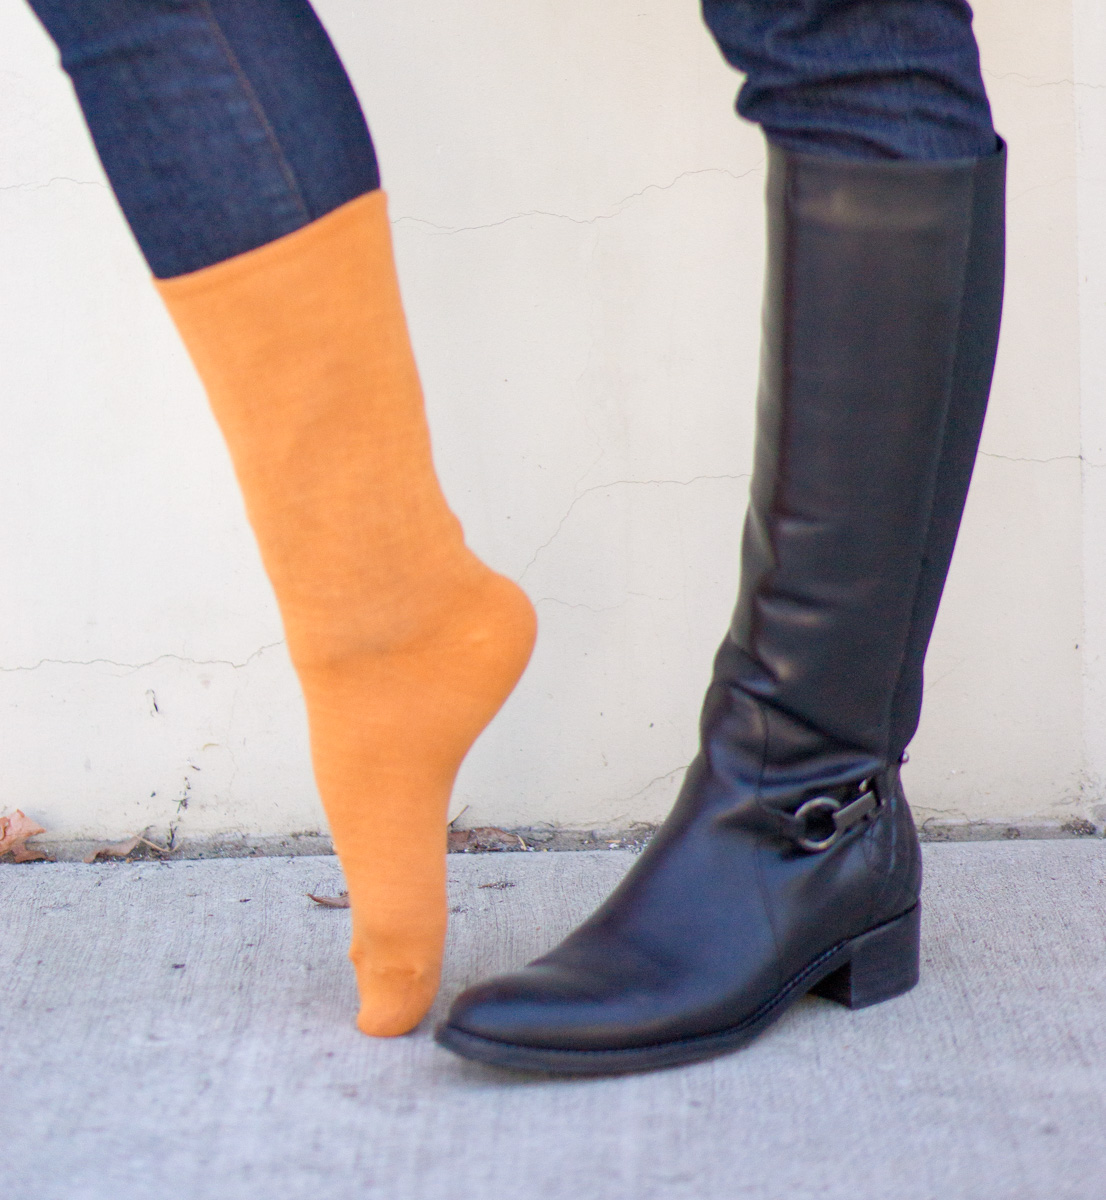 Best Socks for Ankle Booties, Ballet Flats and Tall Riding Boots | Sheec Socks Review | Solehugger Invisicool, Solehugger Invisiwarm, Sockshion, Vince Camuto Franell, Aquatalia & Tieks by Gavrieli